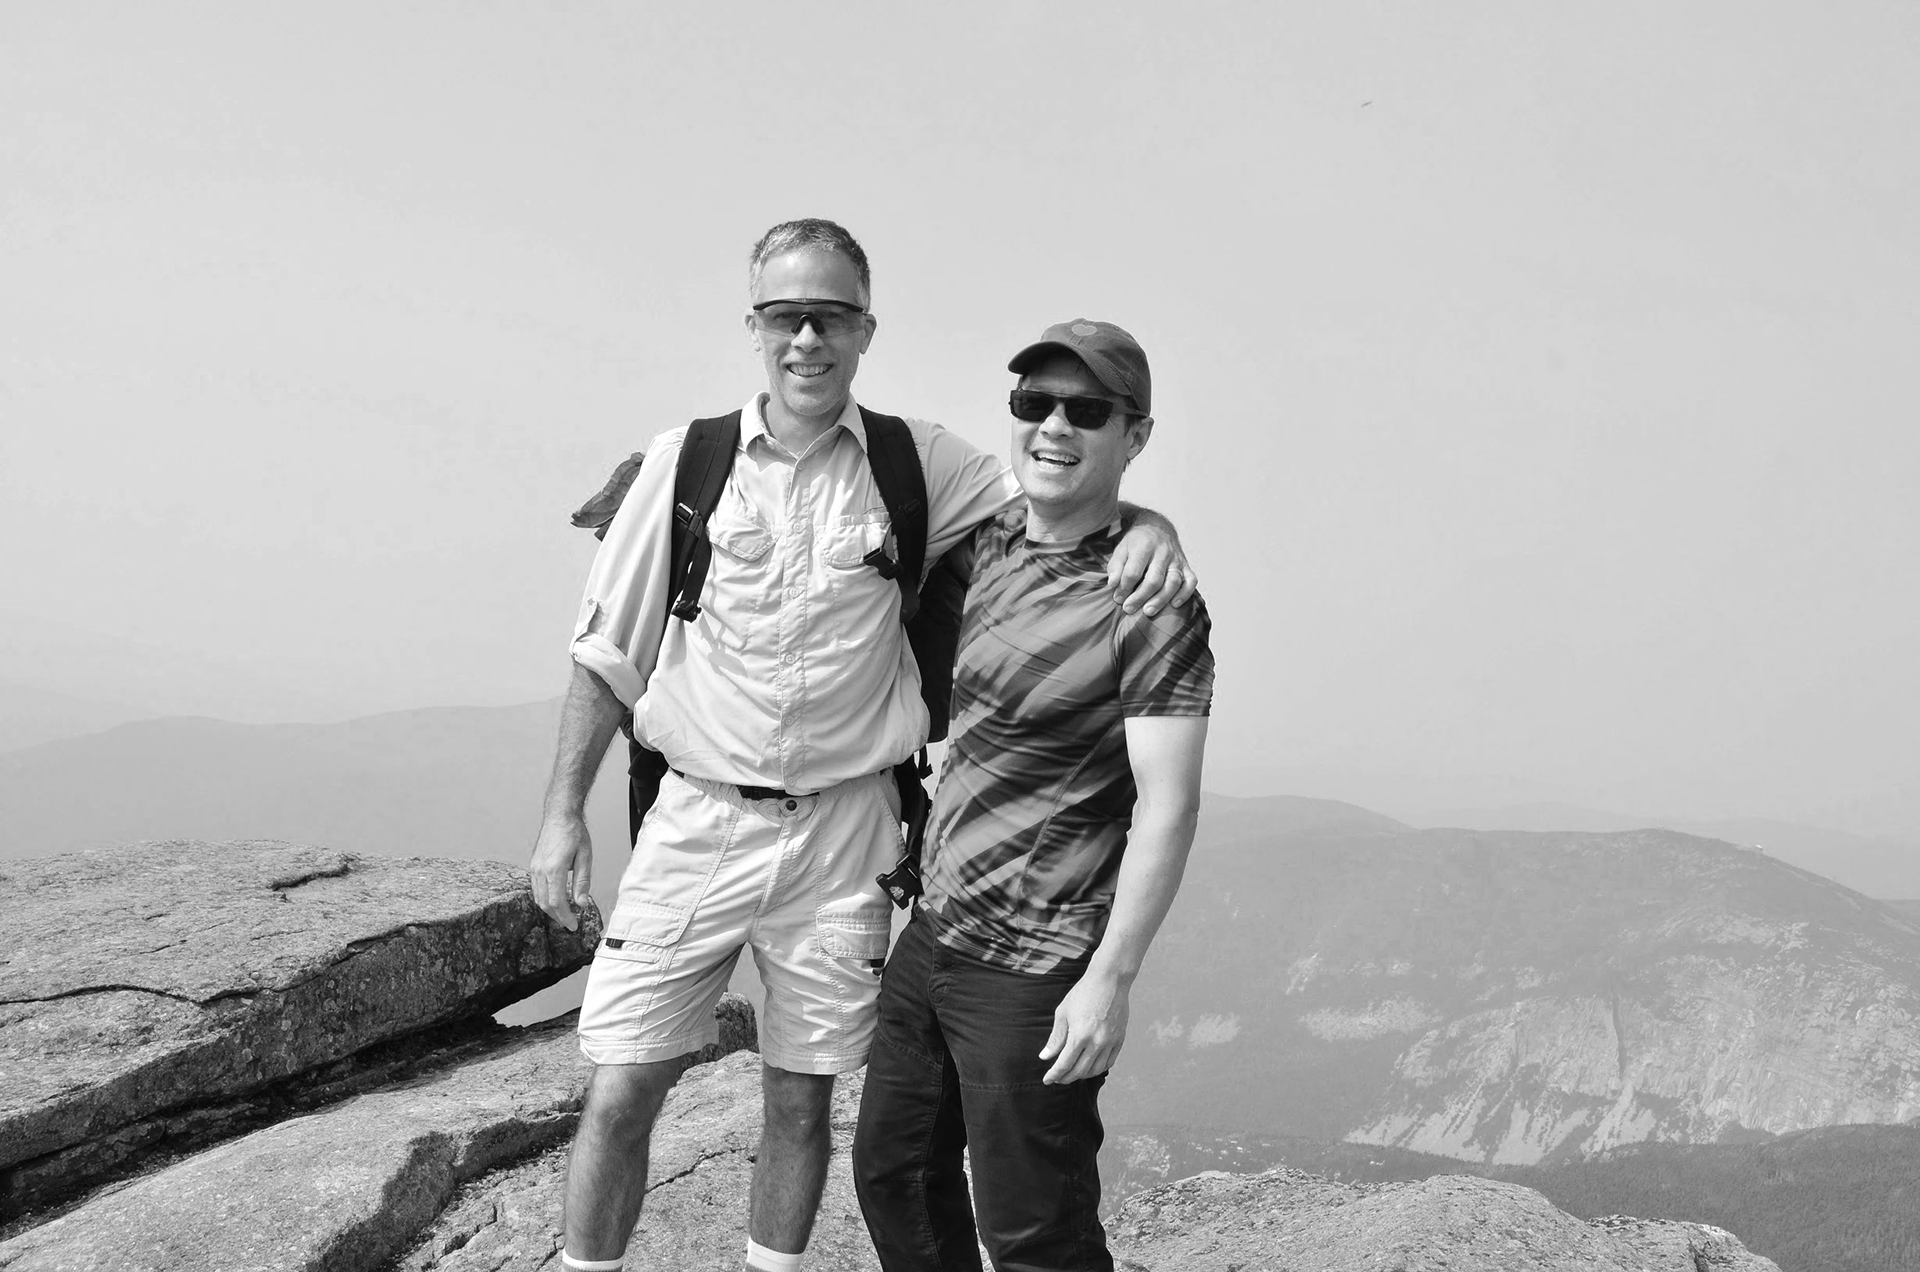 Tony and Andy on top of mountain in New Hampshire